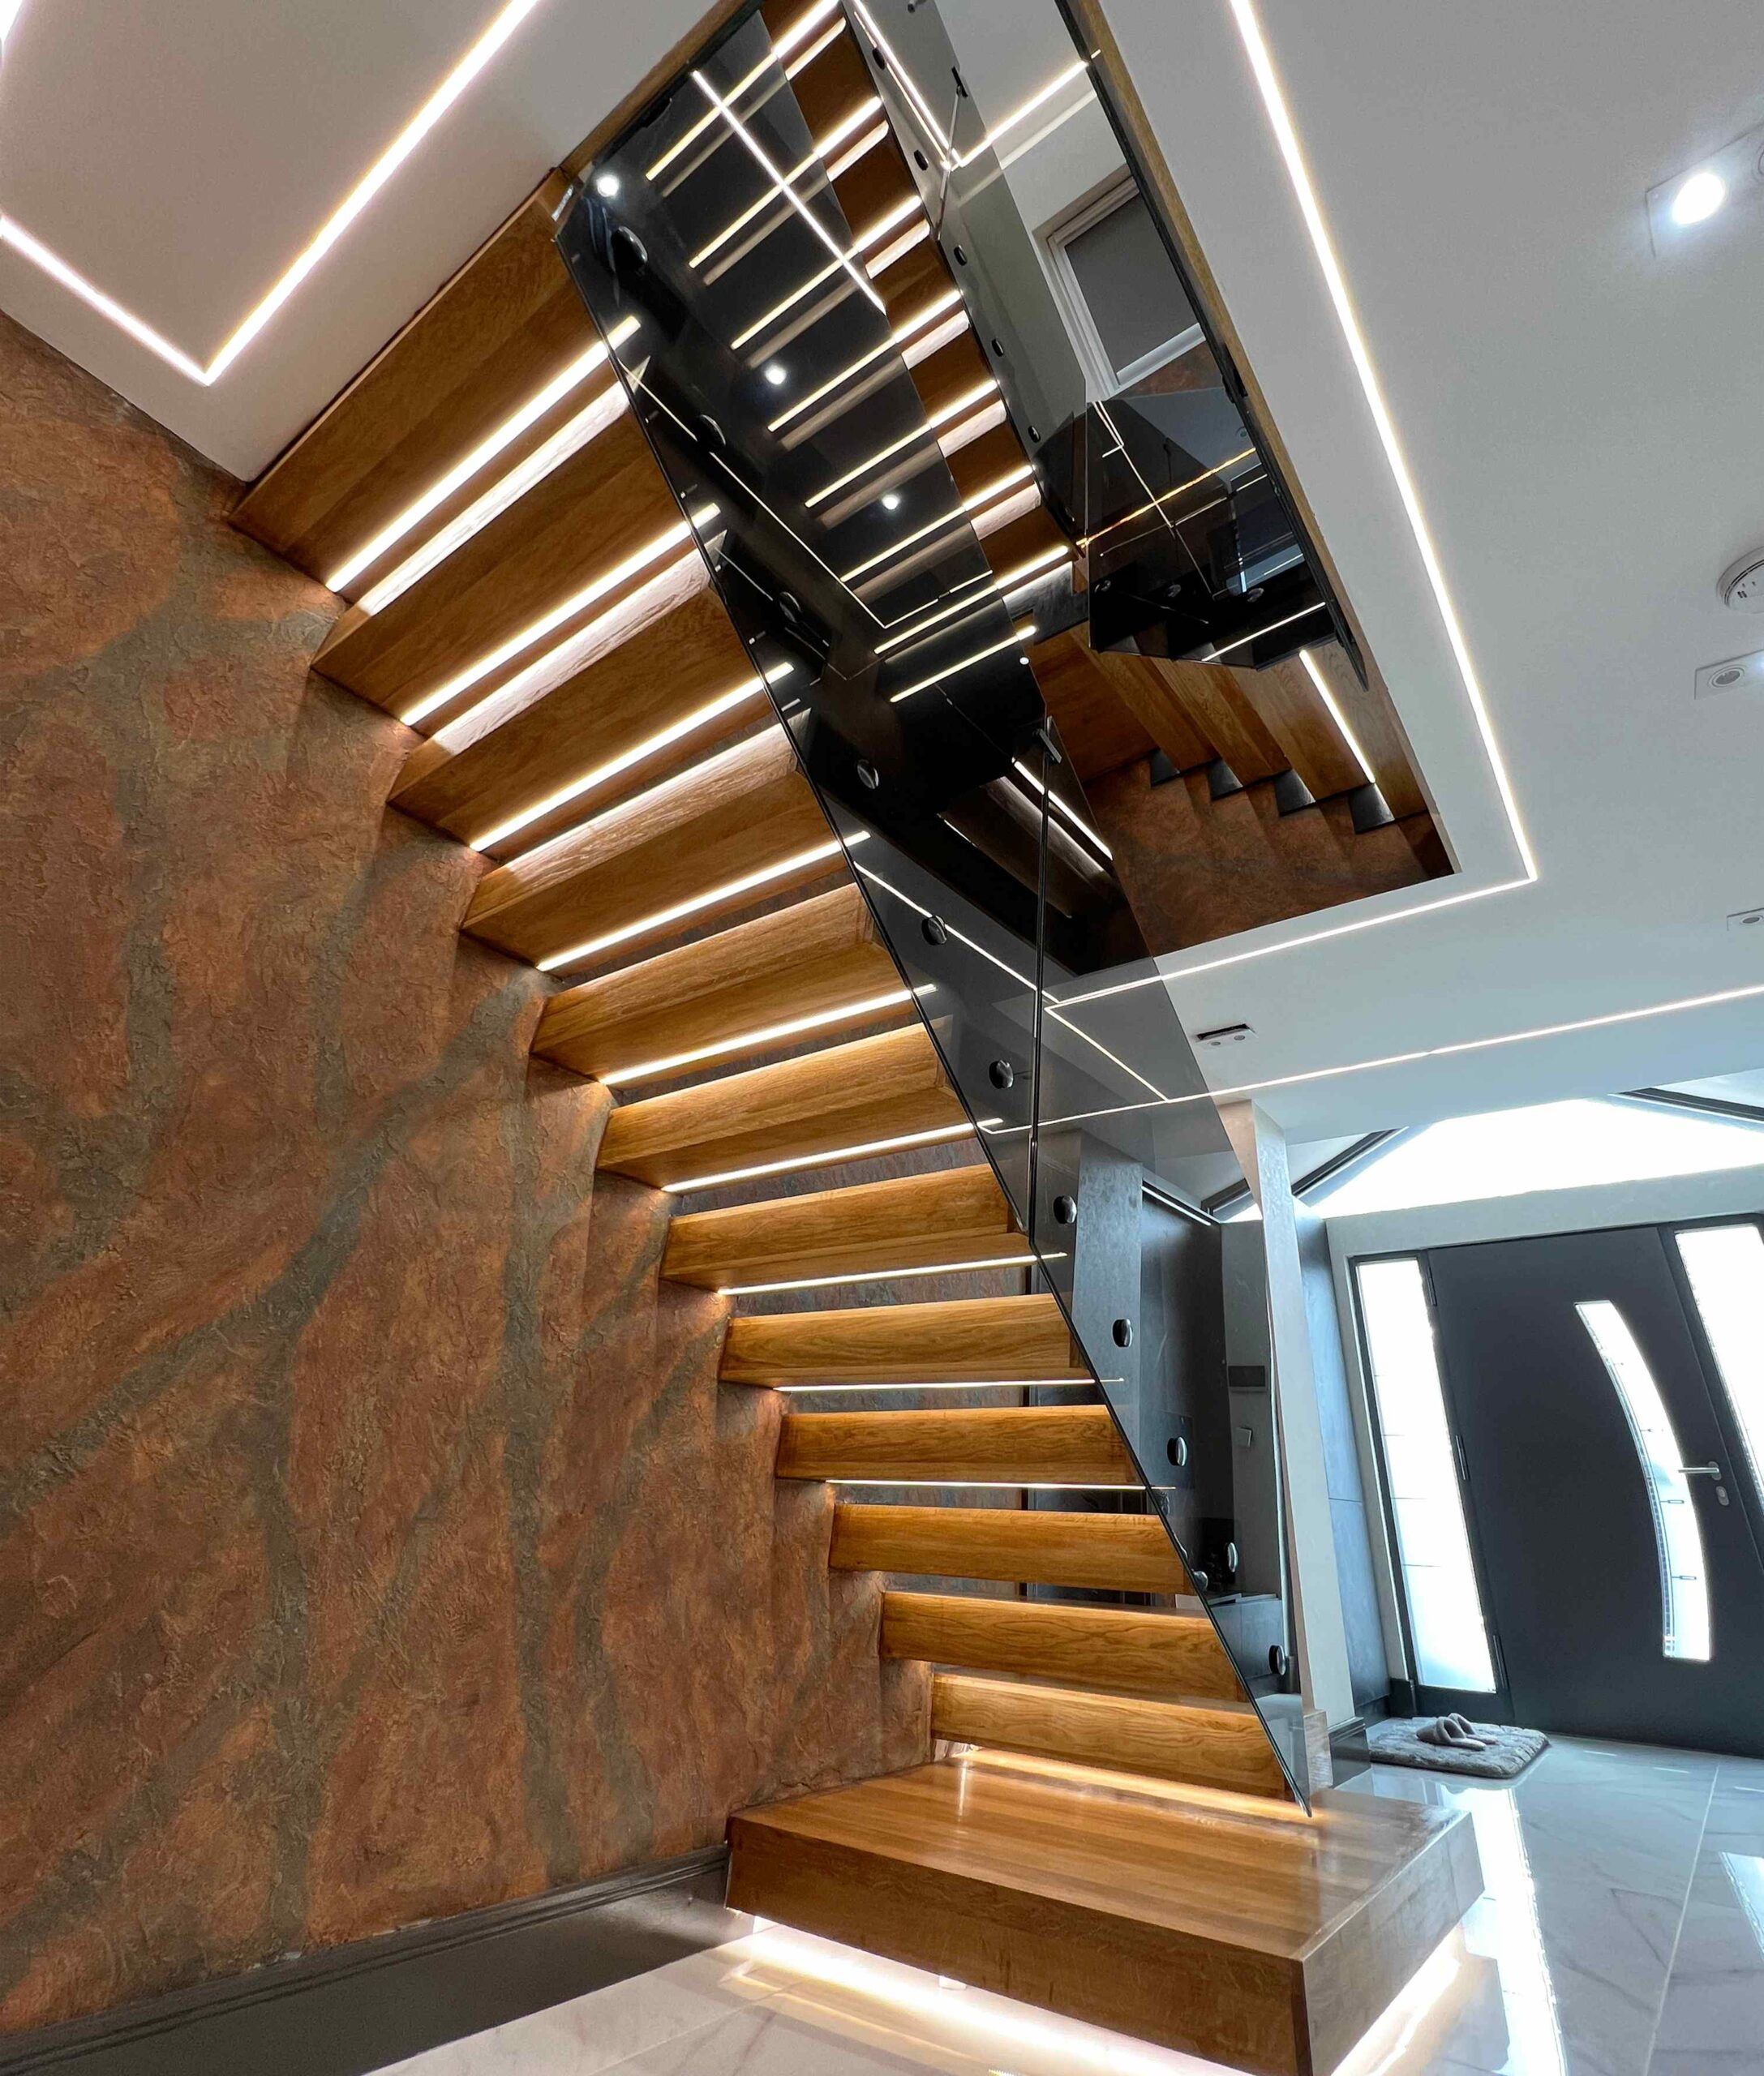 Bottom view of floating staircase with glass balustrade